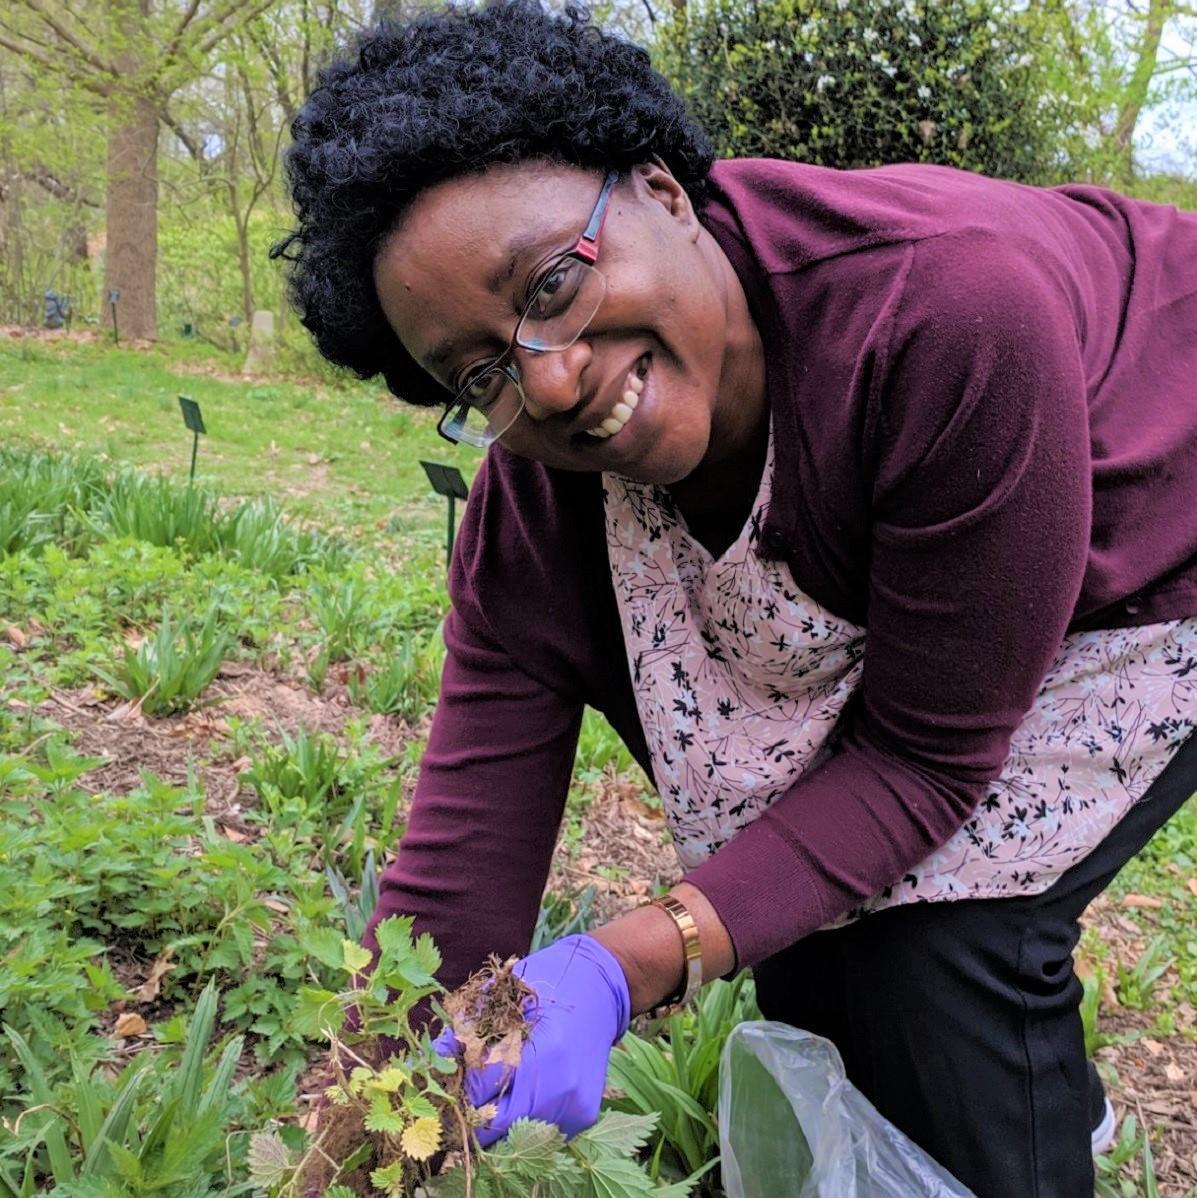 Obanda collecting nettle at the Green Farmacy Garden